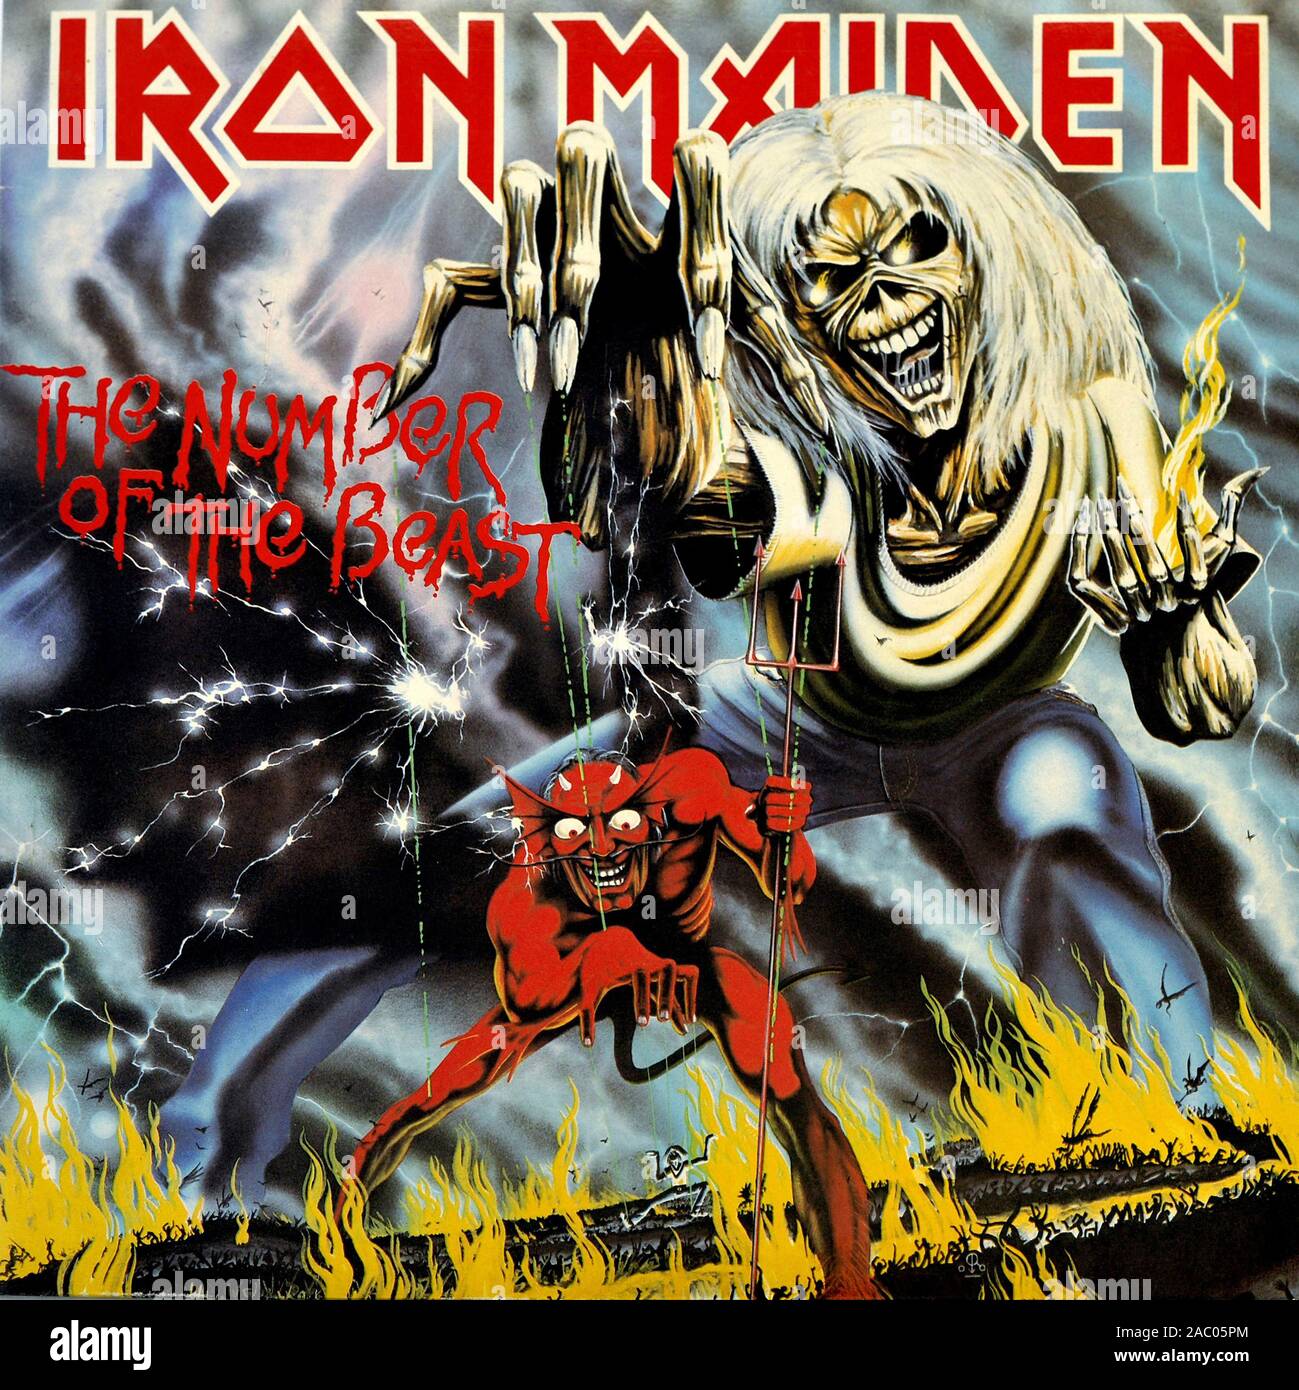 IRON MAIDEN The number of the Beast - Vintage vinyl album cover Stock Photo  - Alamy